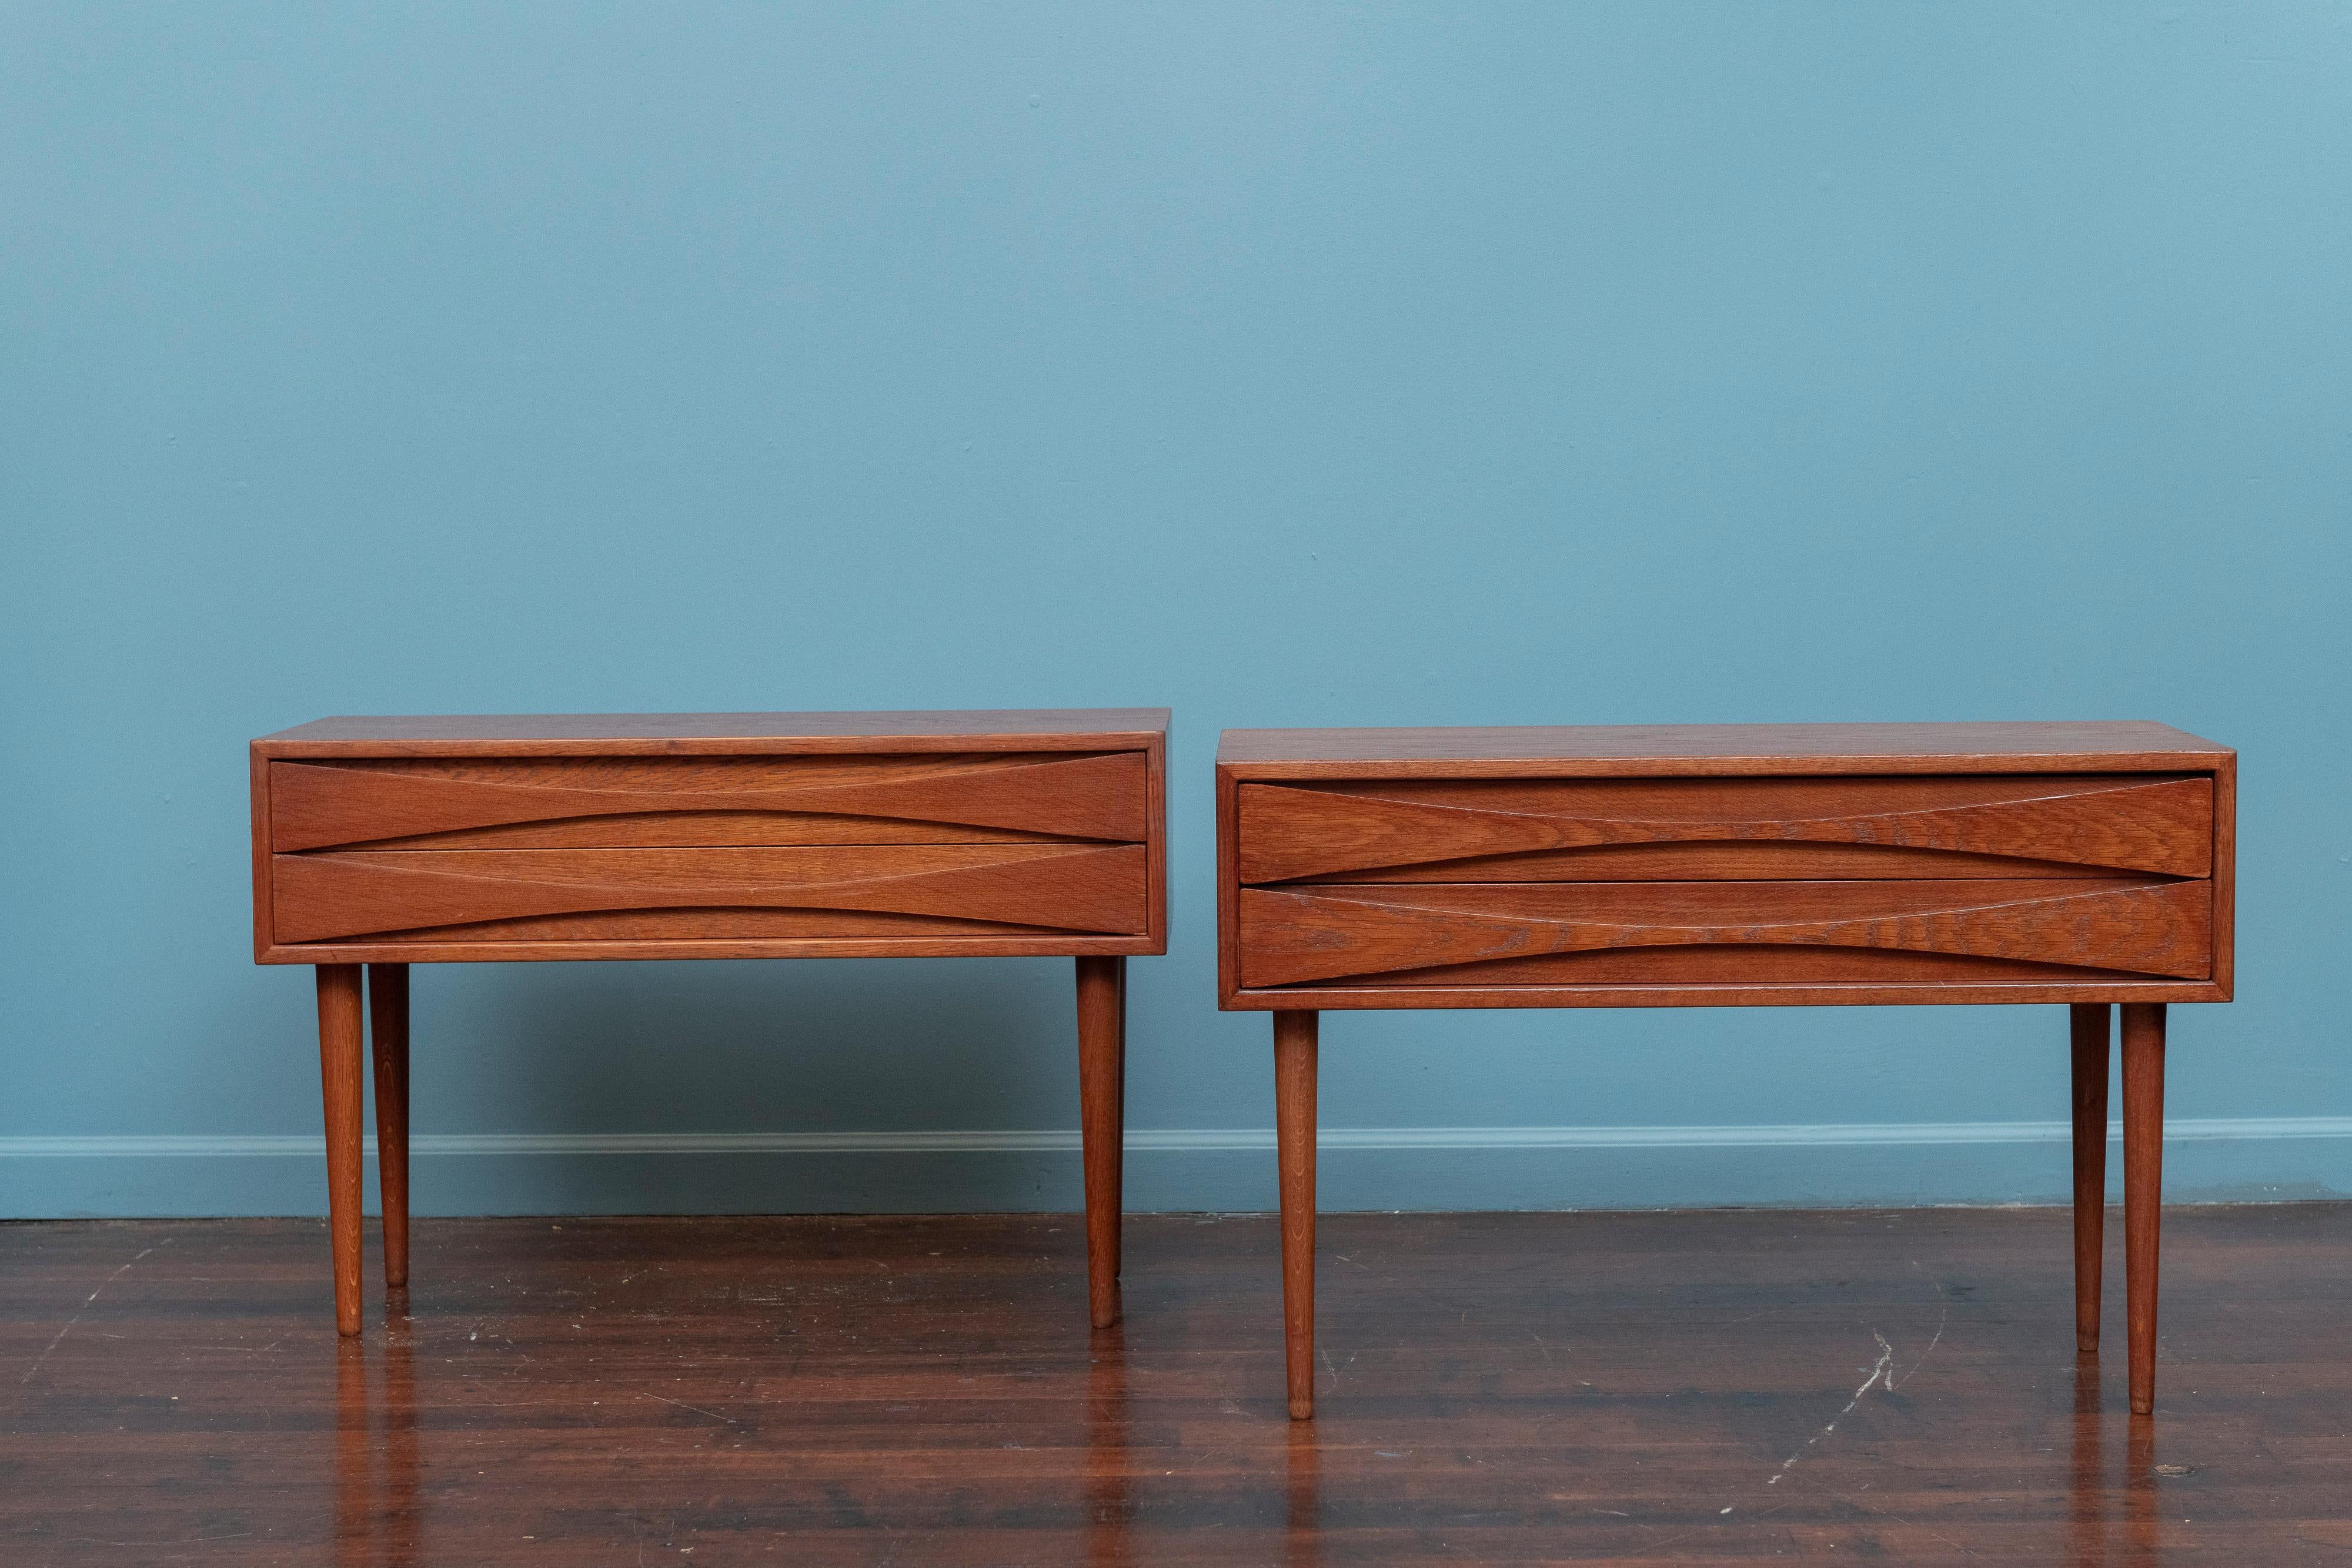 Pair of Niels Clausen design nightstands for NC Mobler, Sweden. Simple clean design nightstands with sculpted drawer pulls on tapering legs. Lovely condition ready to be installed and enjoyed.